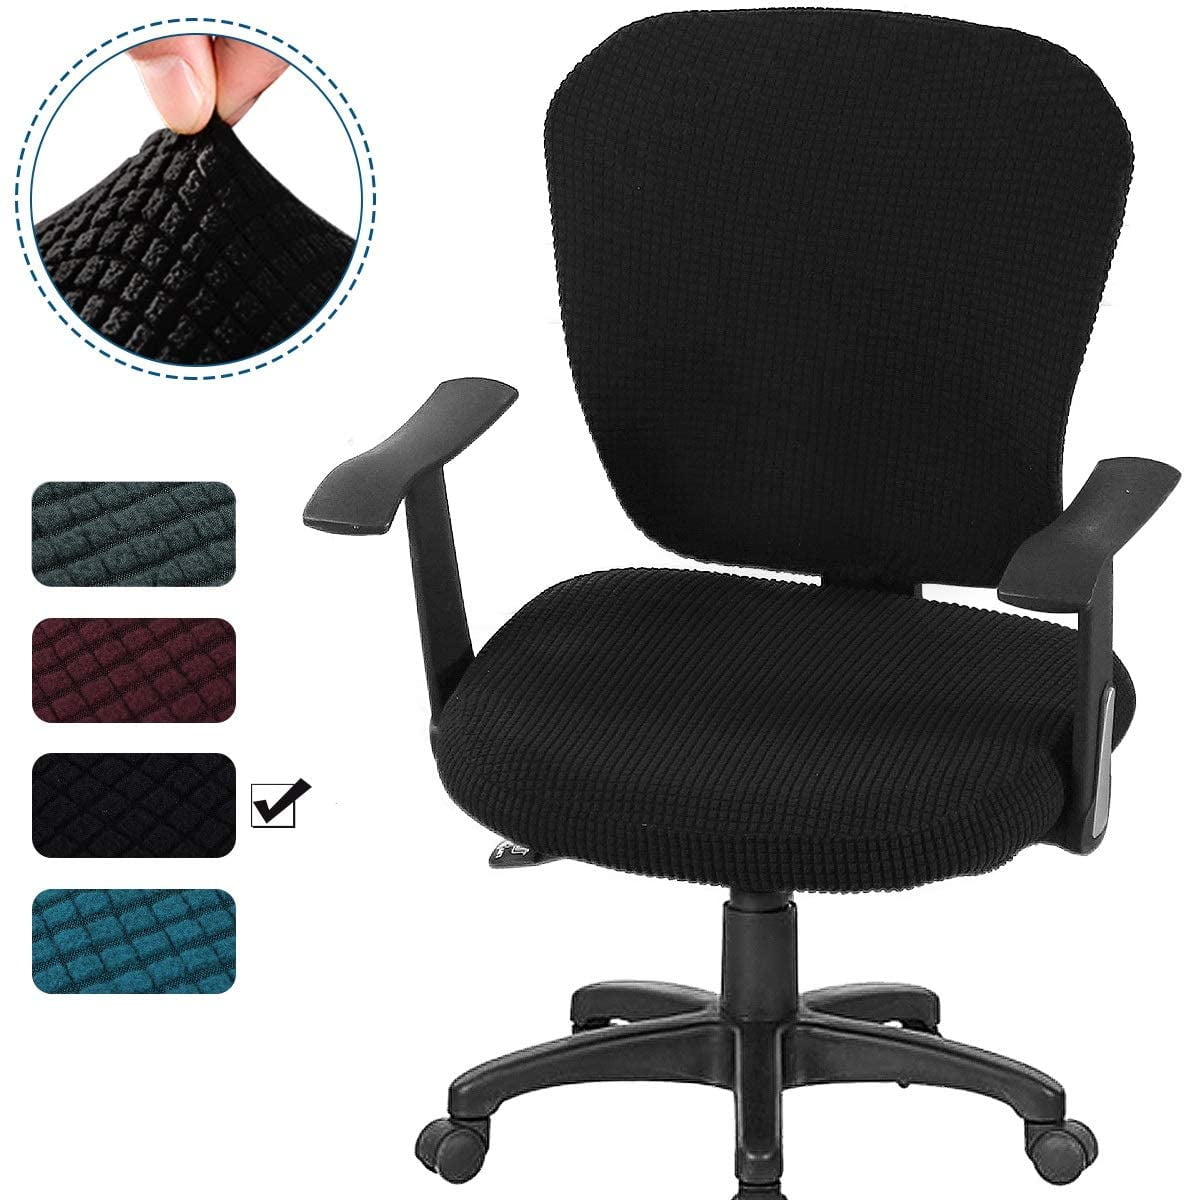 Stretch Computer Office Chair Seat Covers Grey Universal Desk Chair Covers 